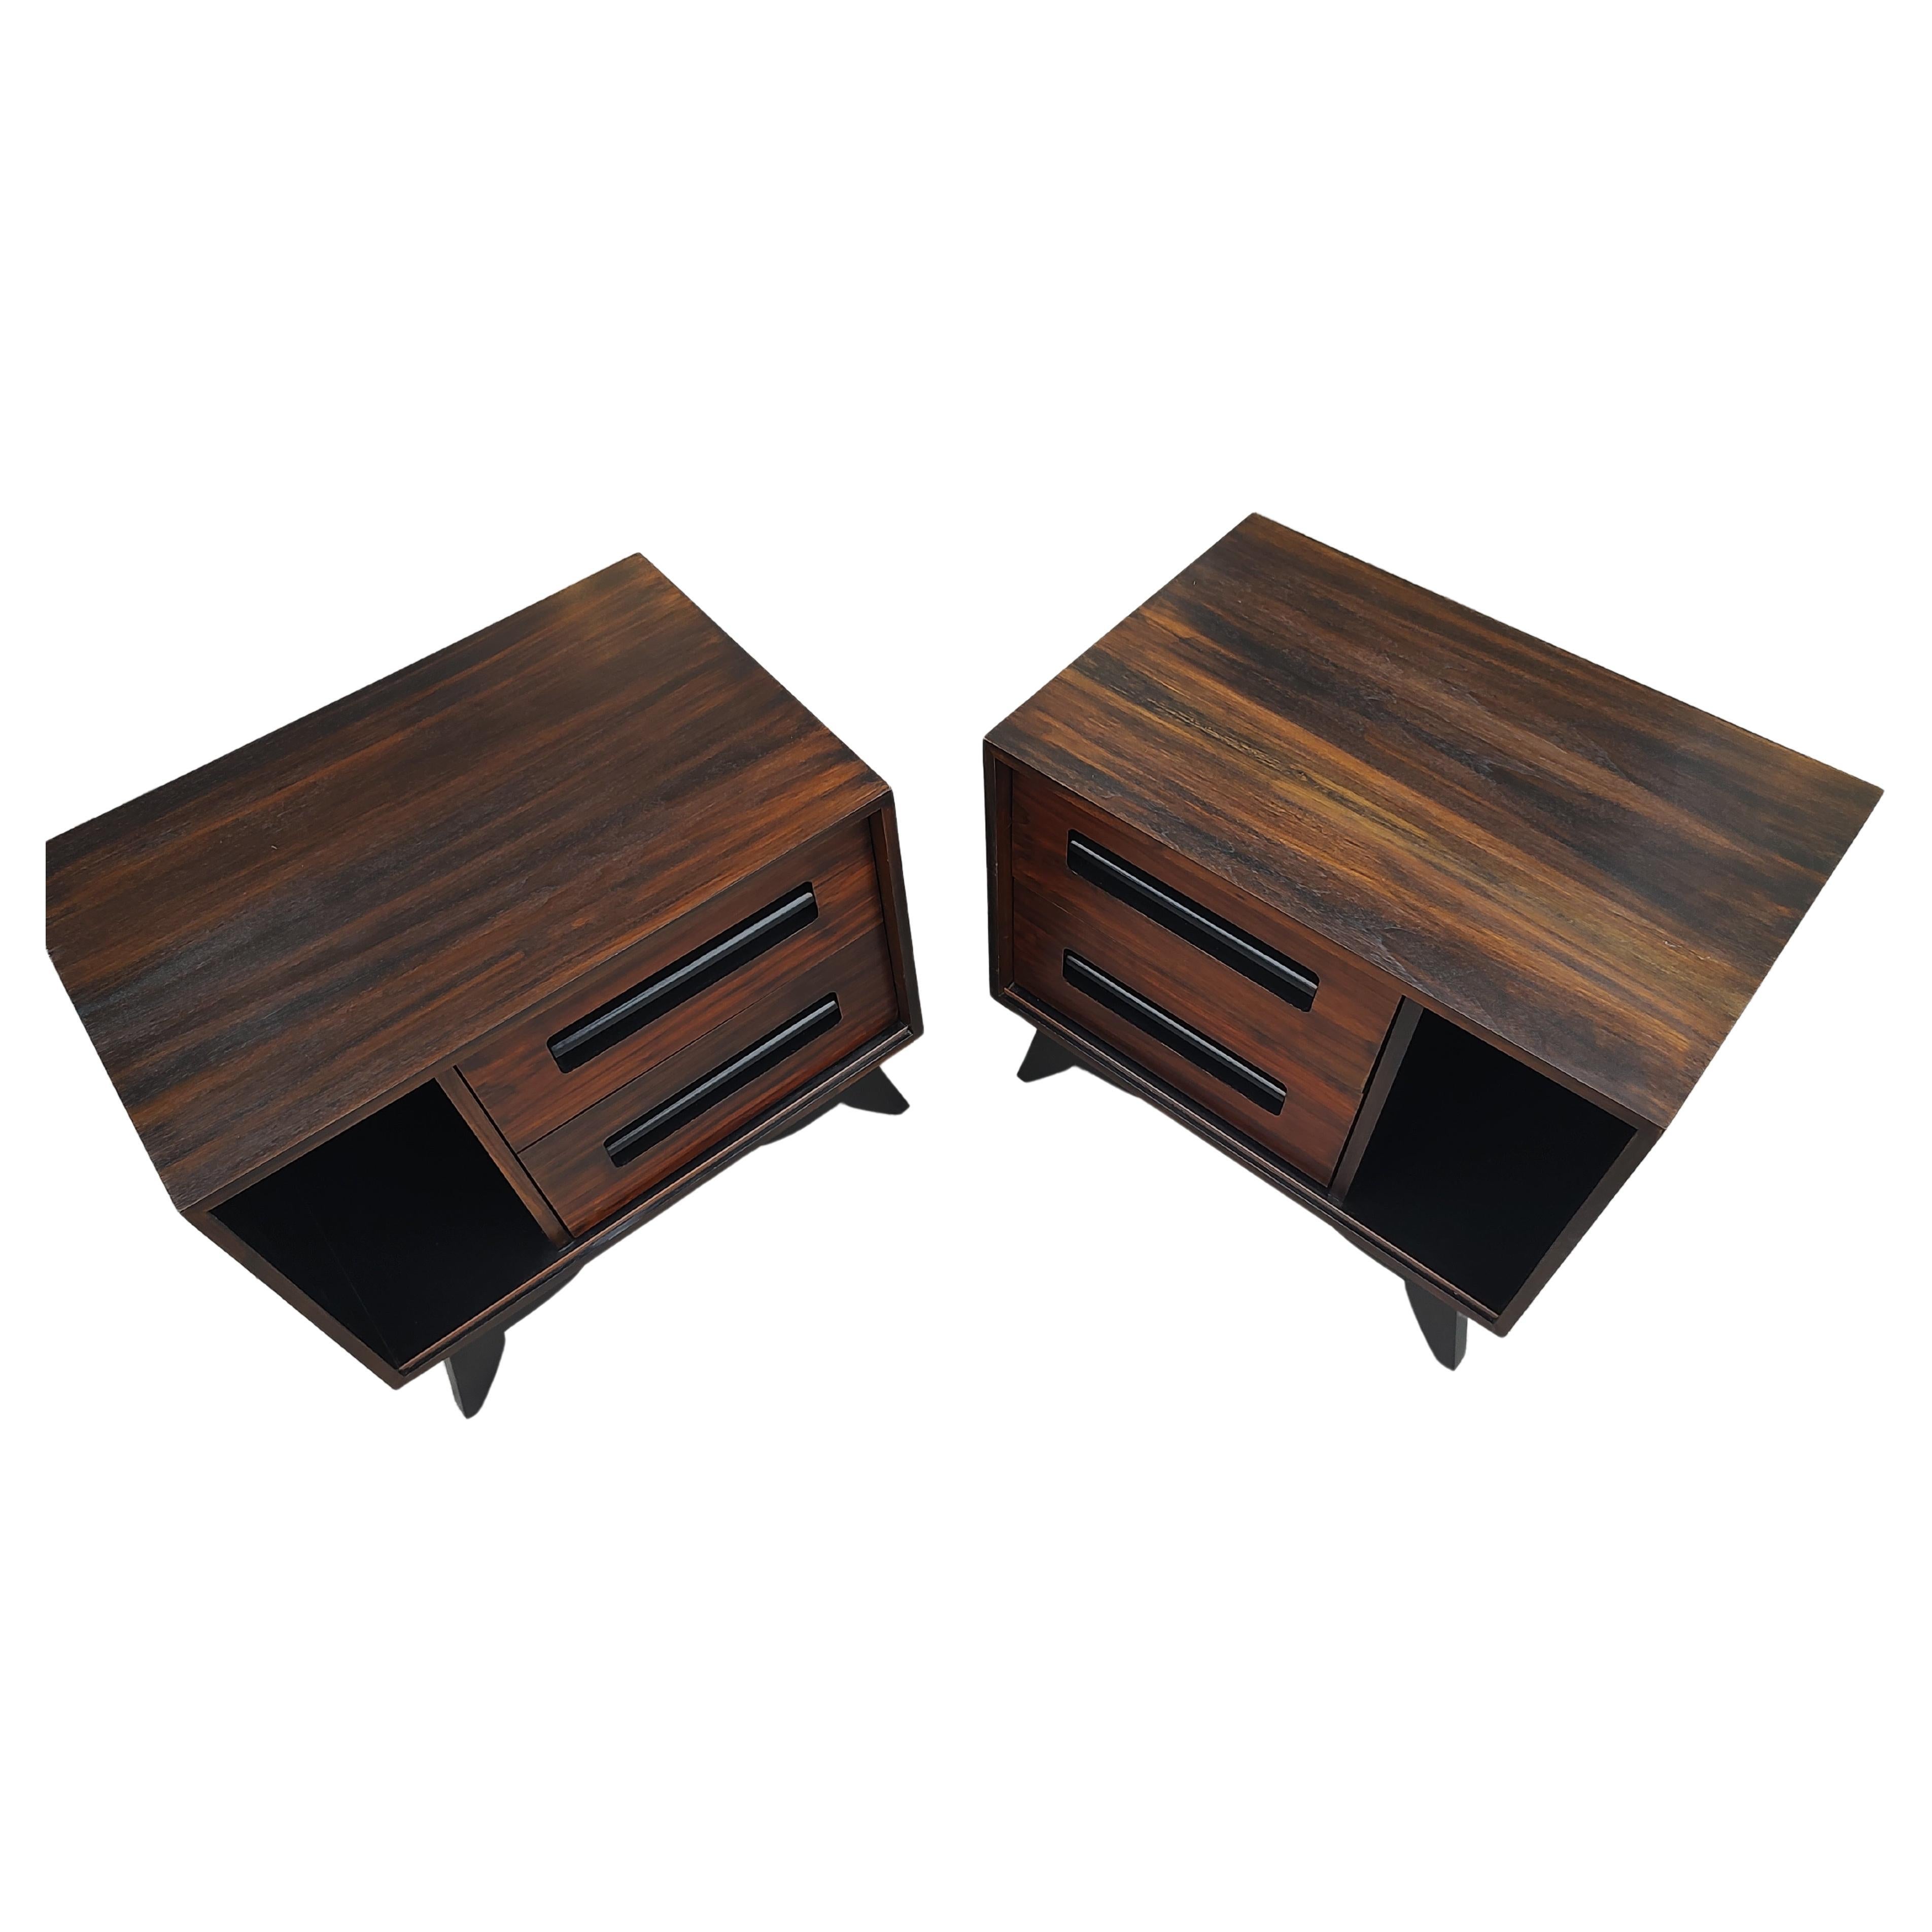 Lacquered Pair of Mid-Century Modern Danish Rosewood & Black Lacquer Nightstands C1970 For Sale